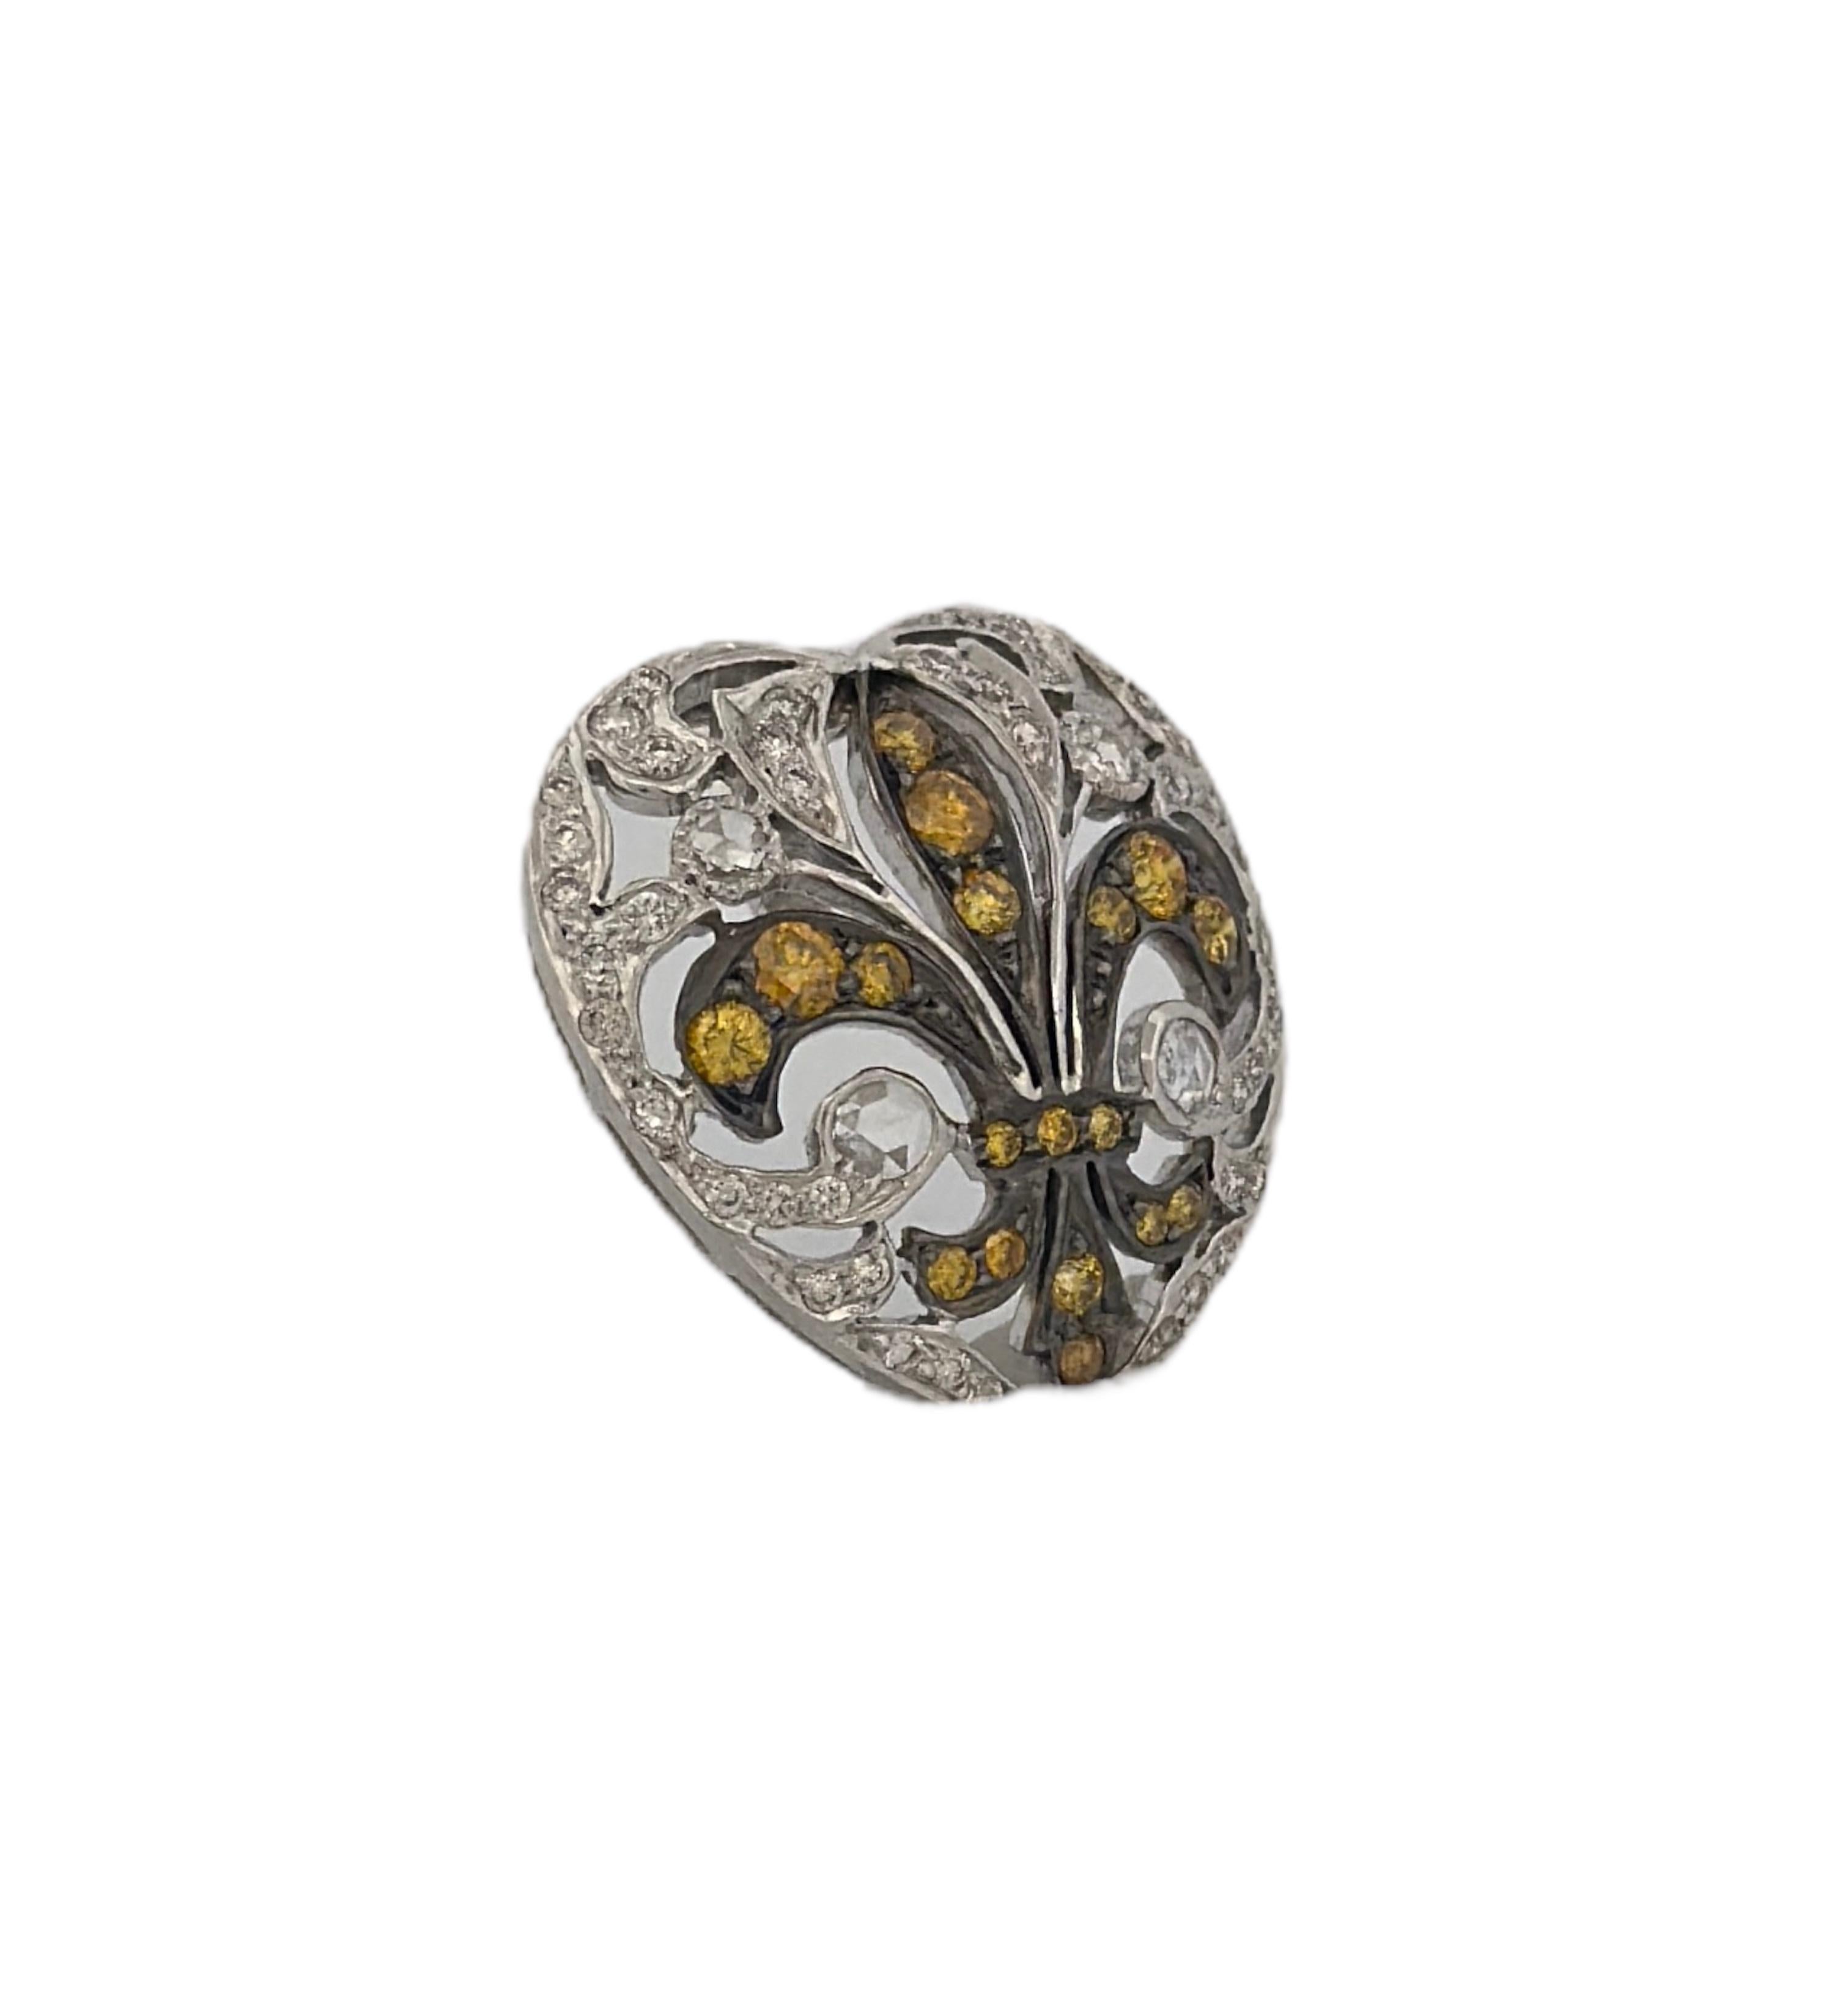 Dating back to the early 20th century, this pendant, adorned with both yellow and white diamonds totaling 0.85 carats, serves as a remarkable showcase of the creative ingenuity and exquisite craftsmanship characteristic of its era. Its